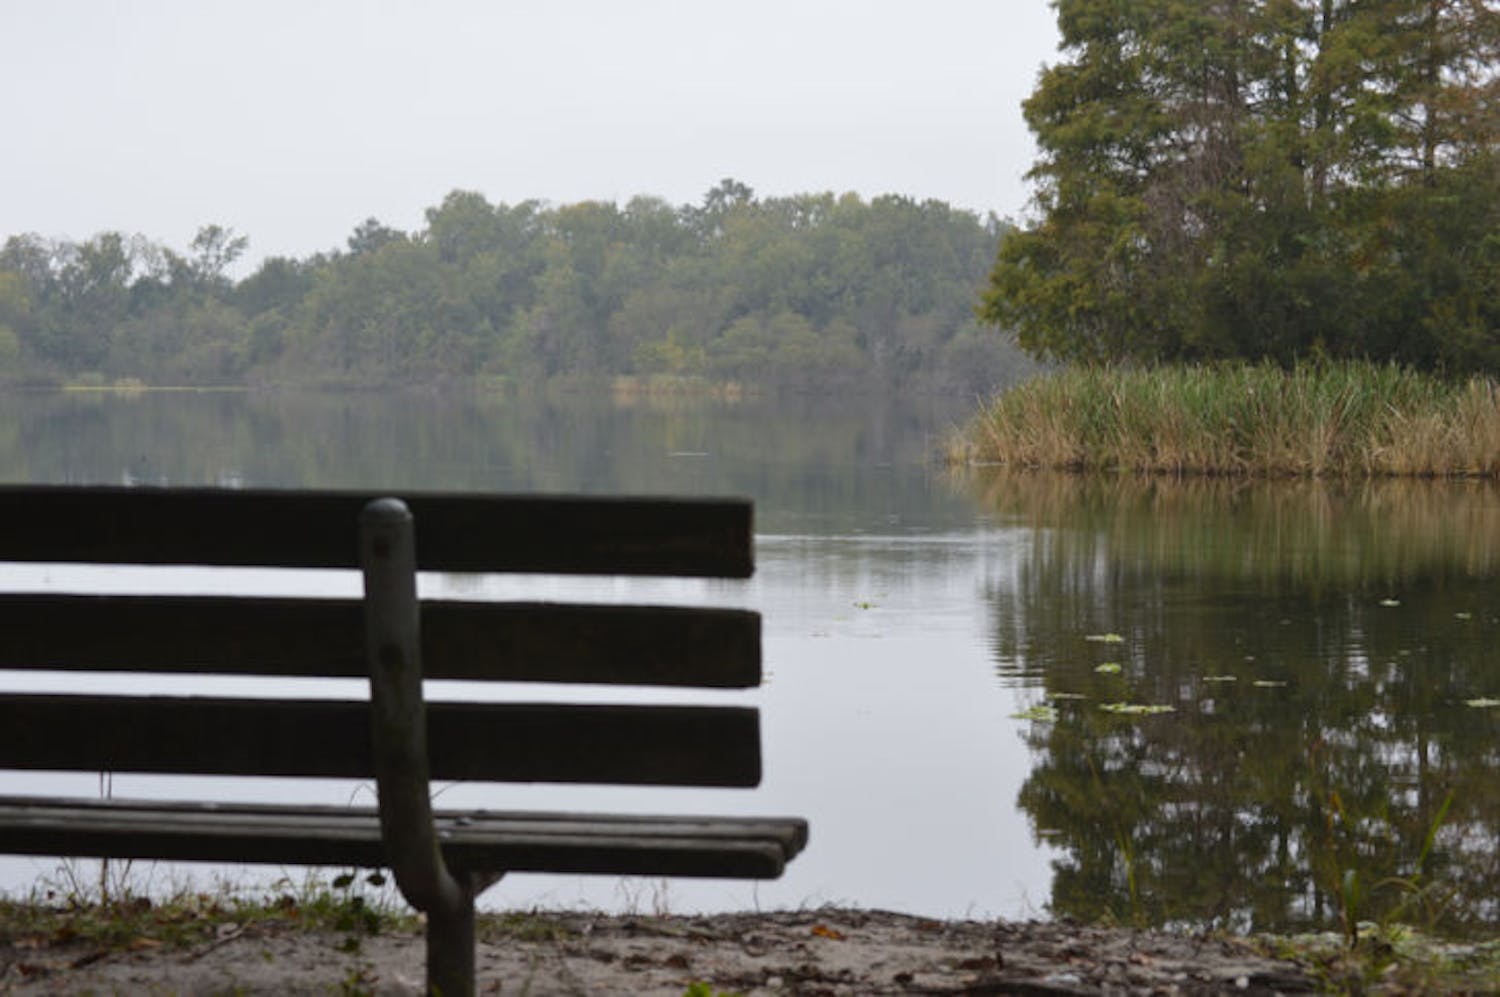 Lake Alice spans approximately 129.5 acres on UF campus.